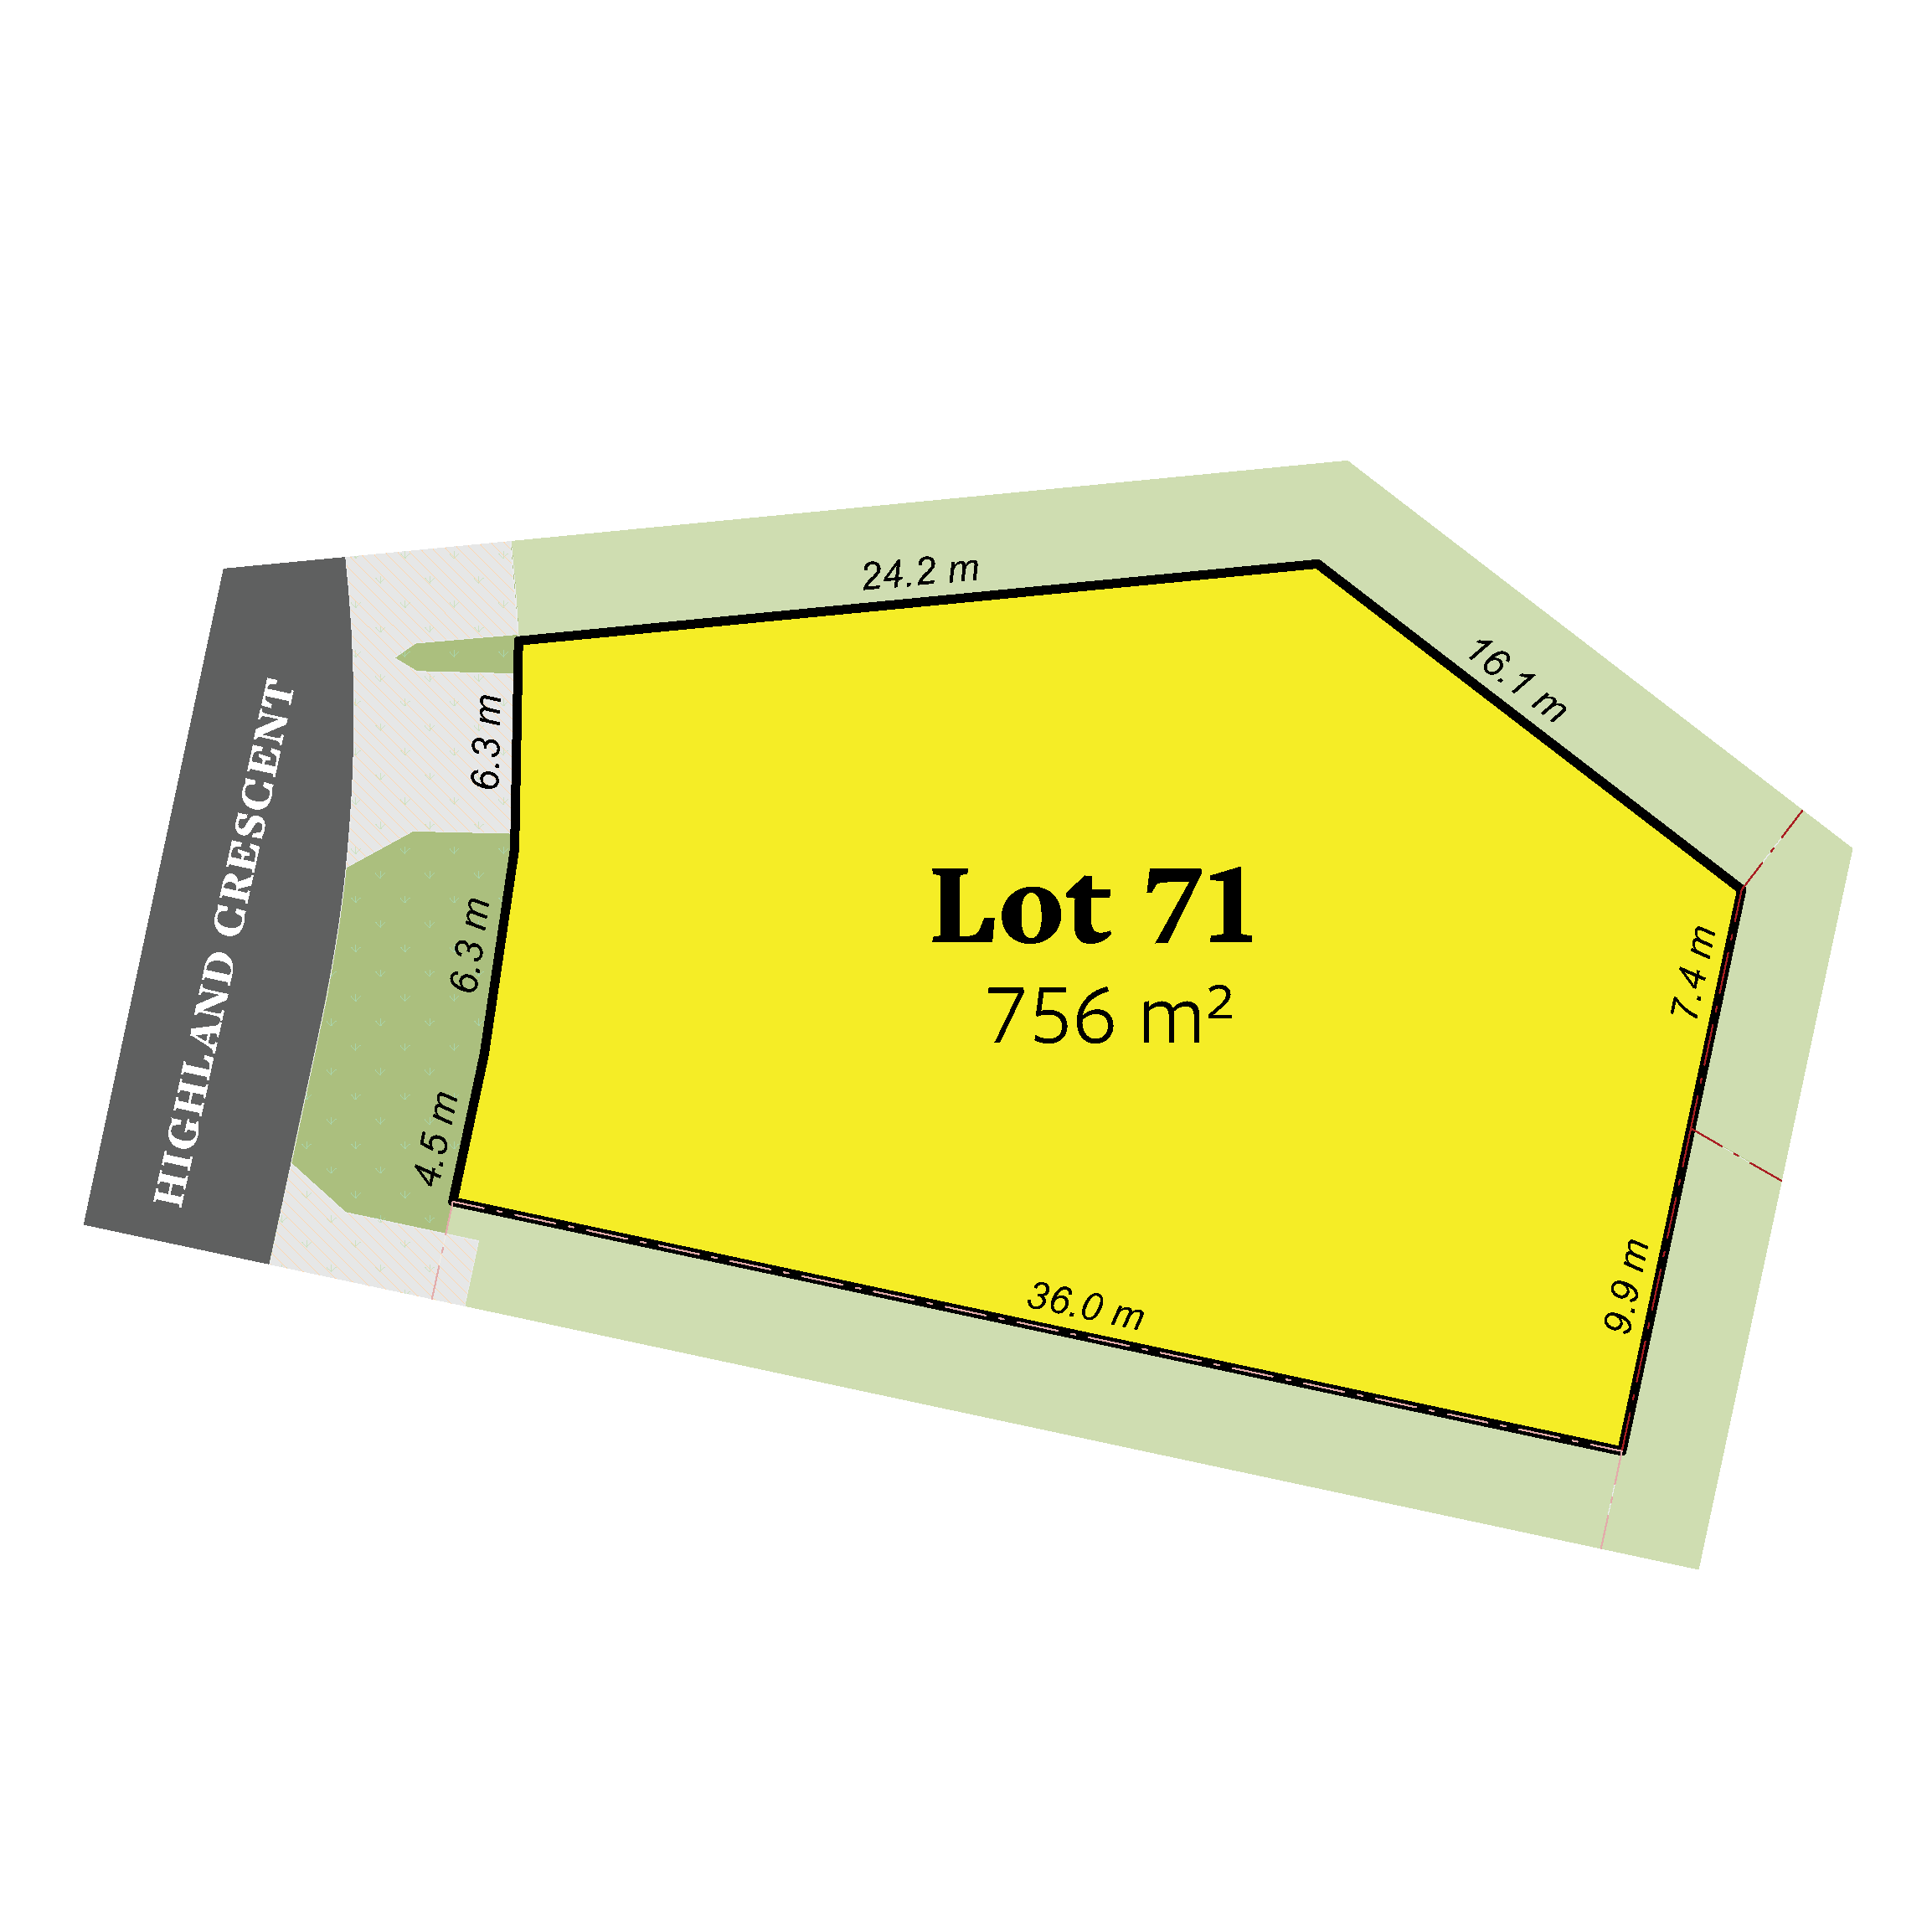 Image of Lot 71